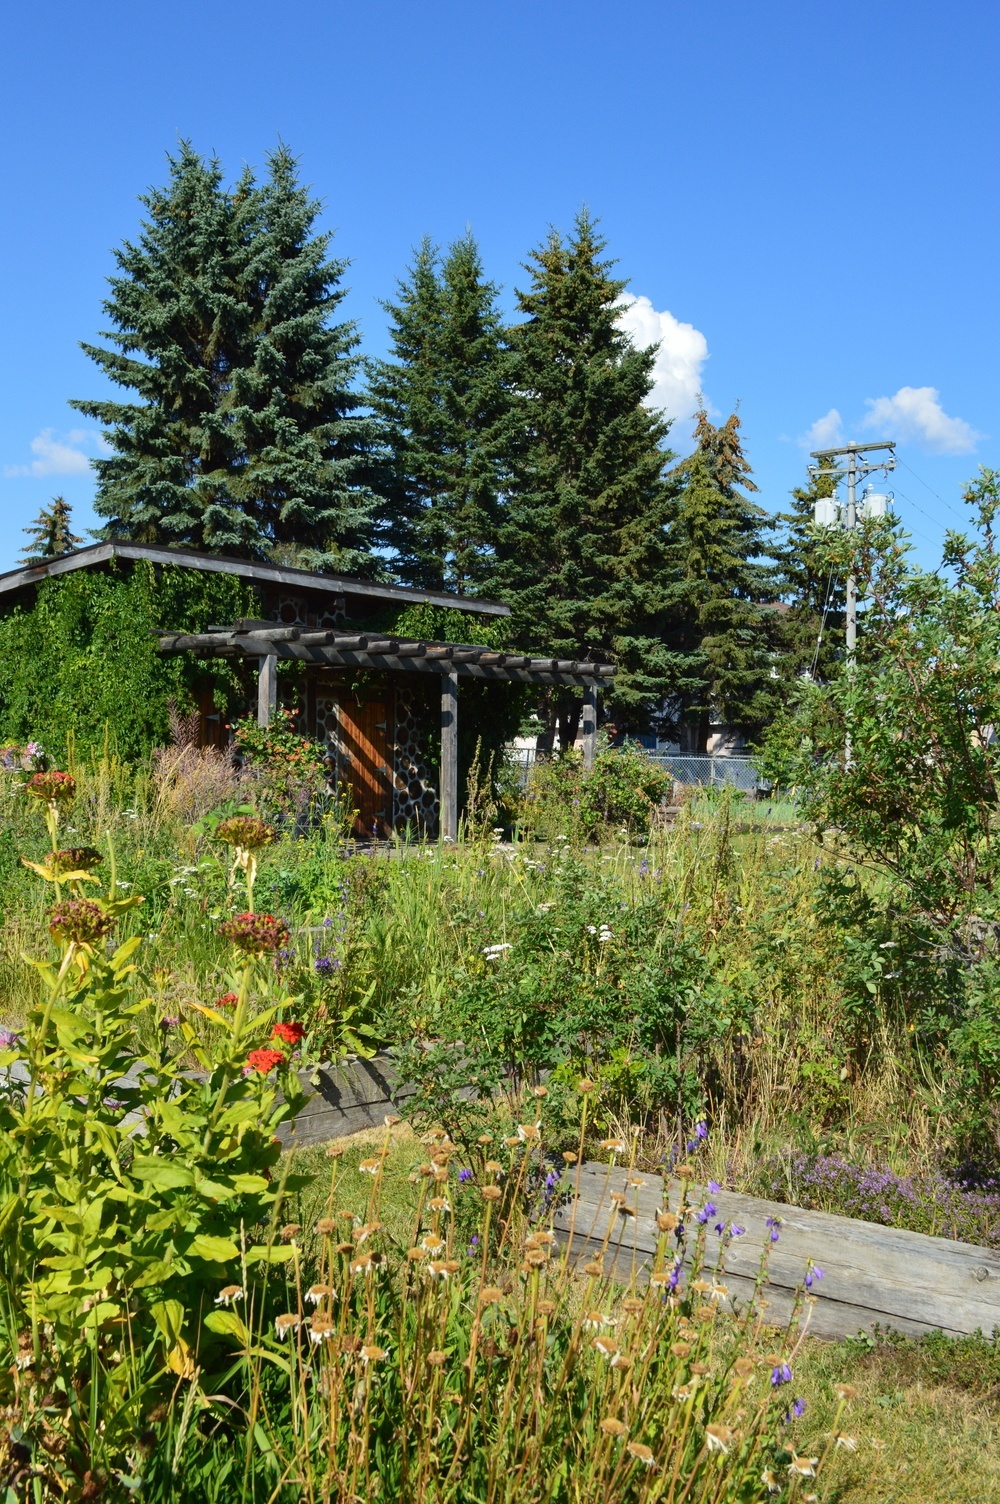 Garden and shed at the Community Garden